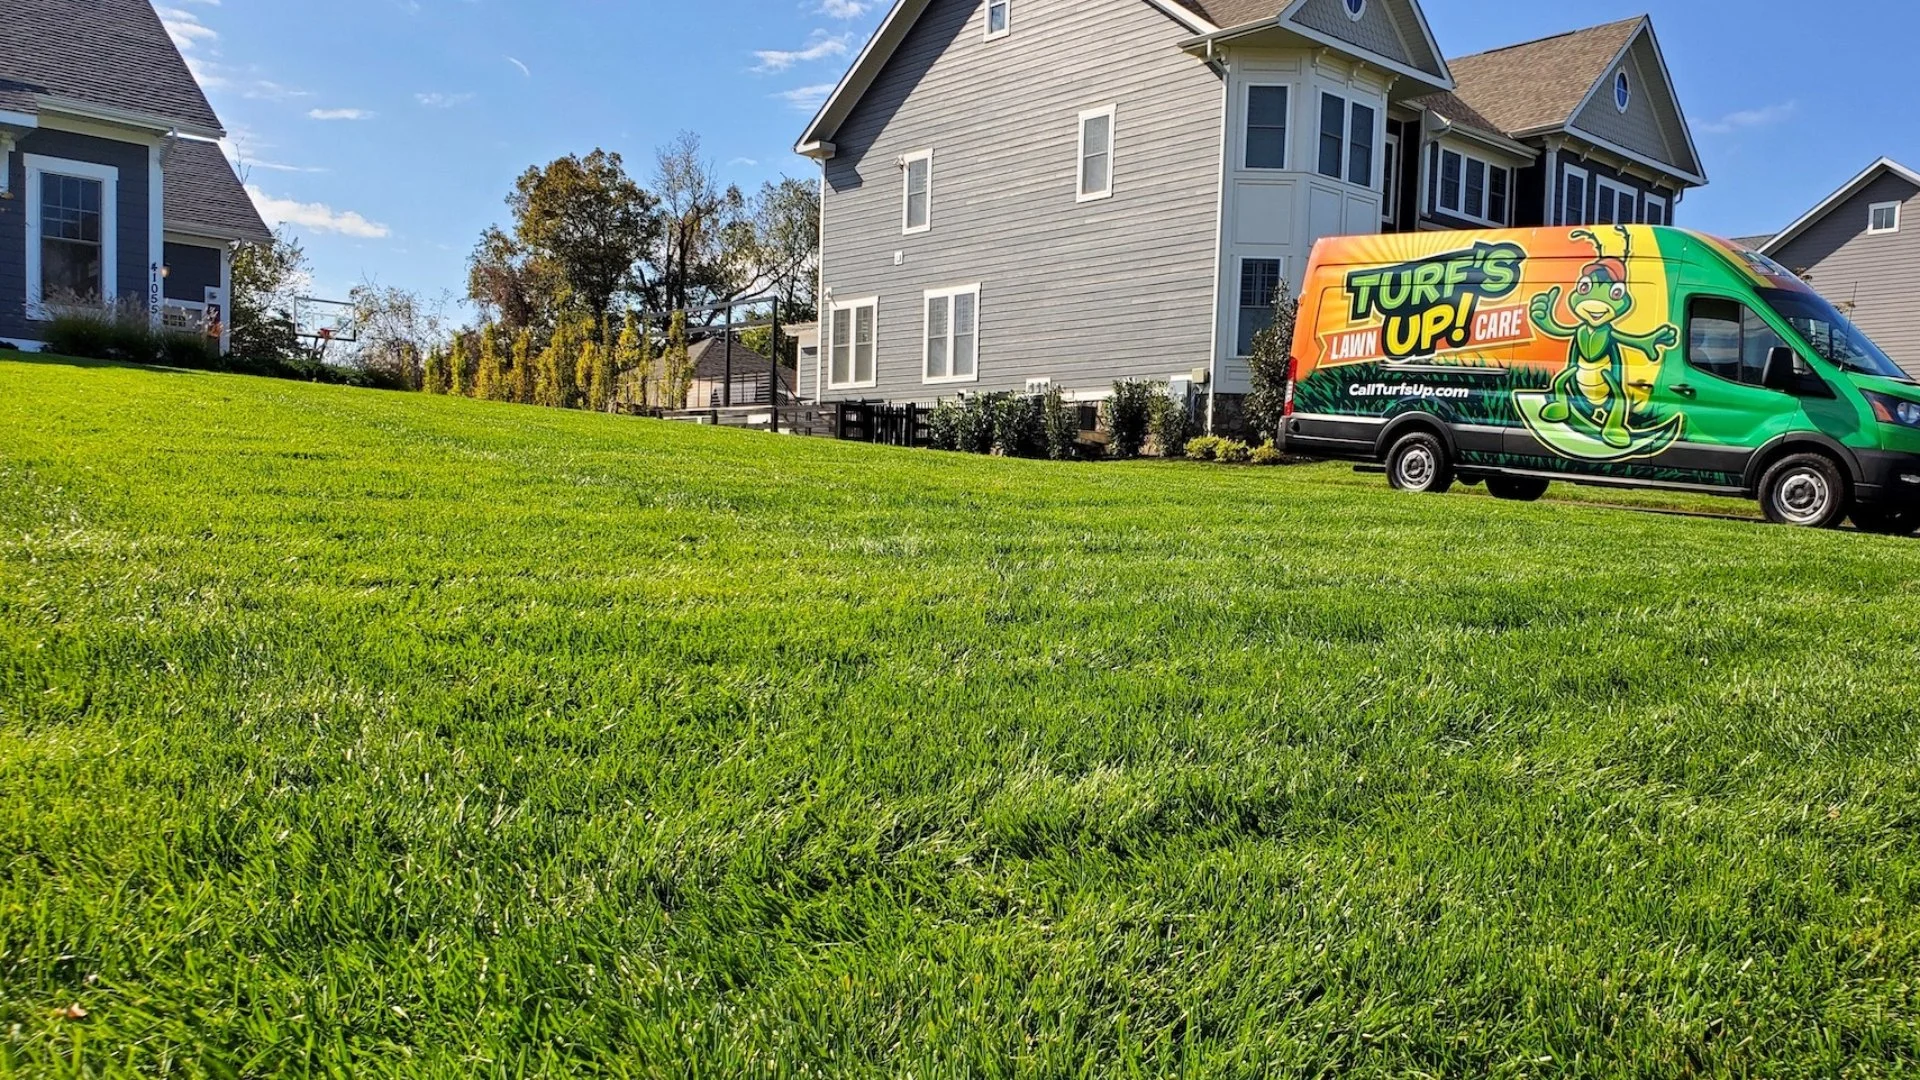 Turf's Up Lawn Care company truck in front of a customers home in Leesburg, VA.